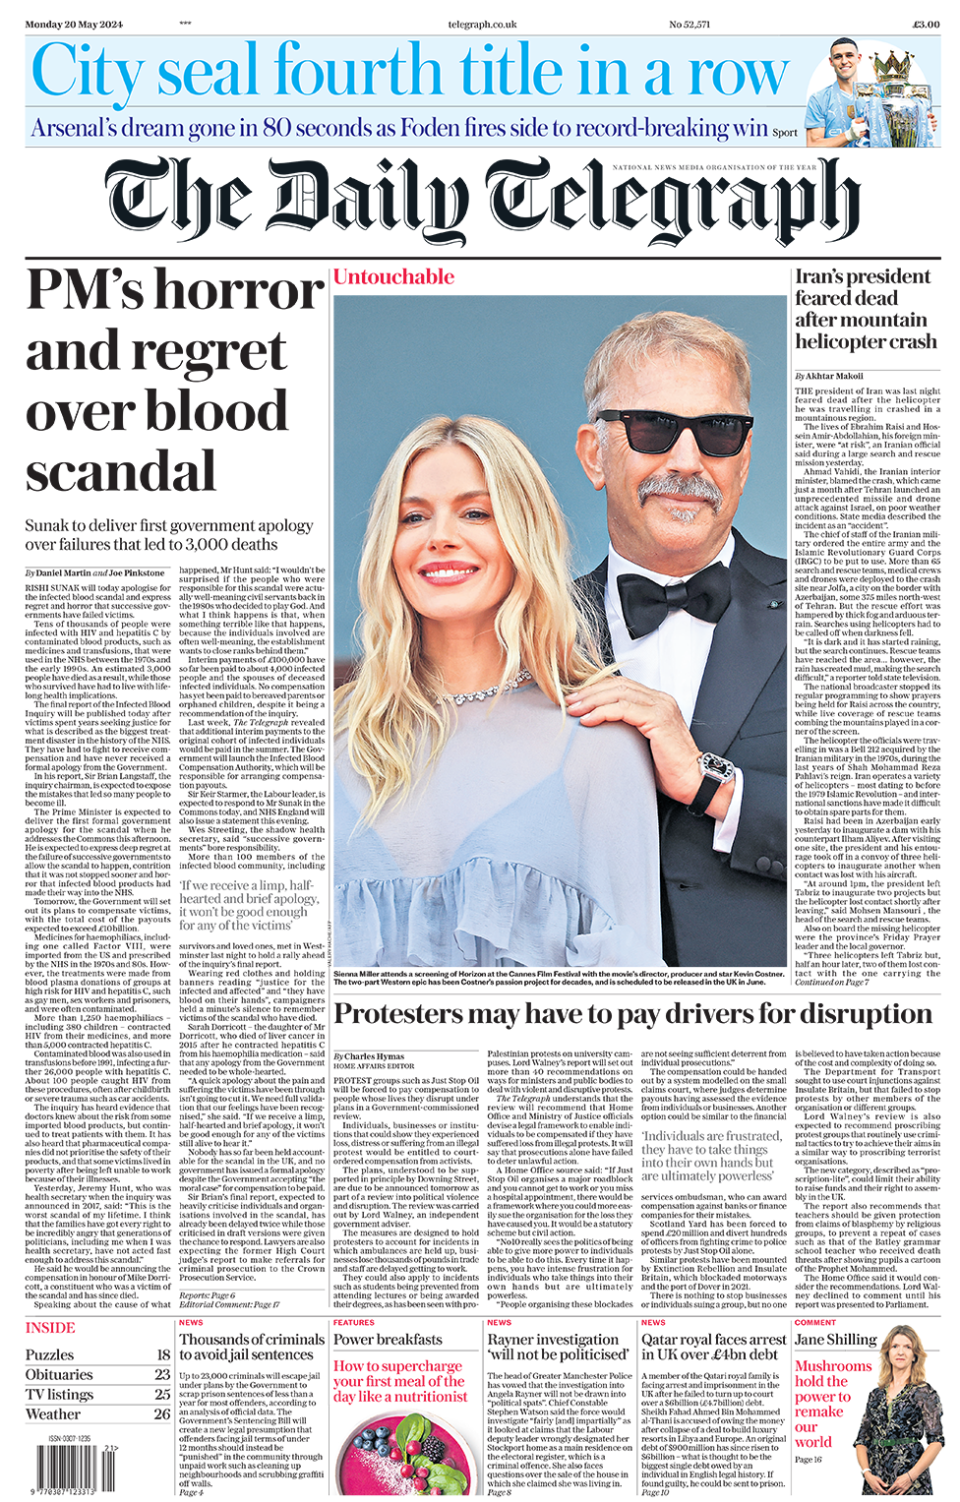 The headline on the front page of the Daily Telegraph reads: "PM's horror and regret over blood scandal"